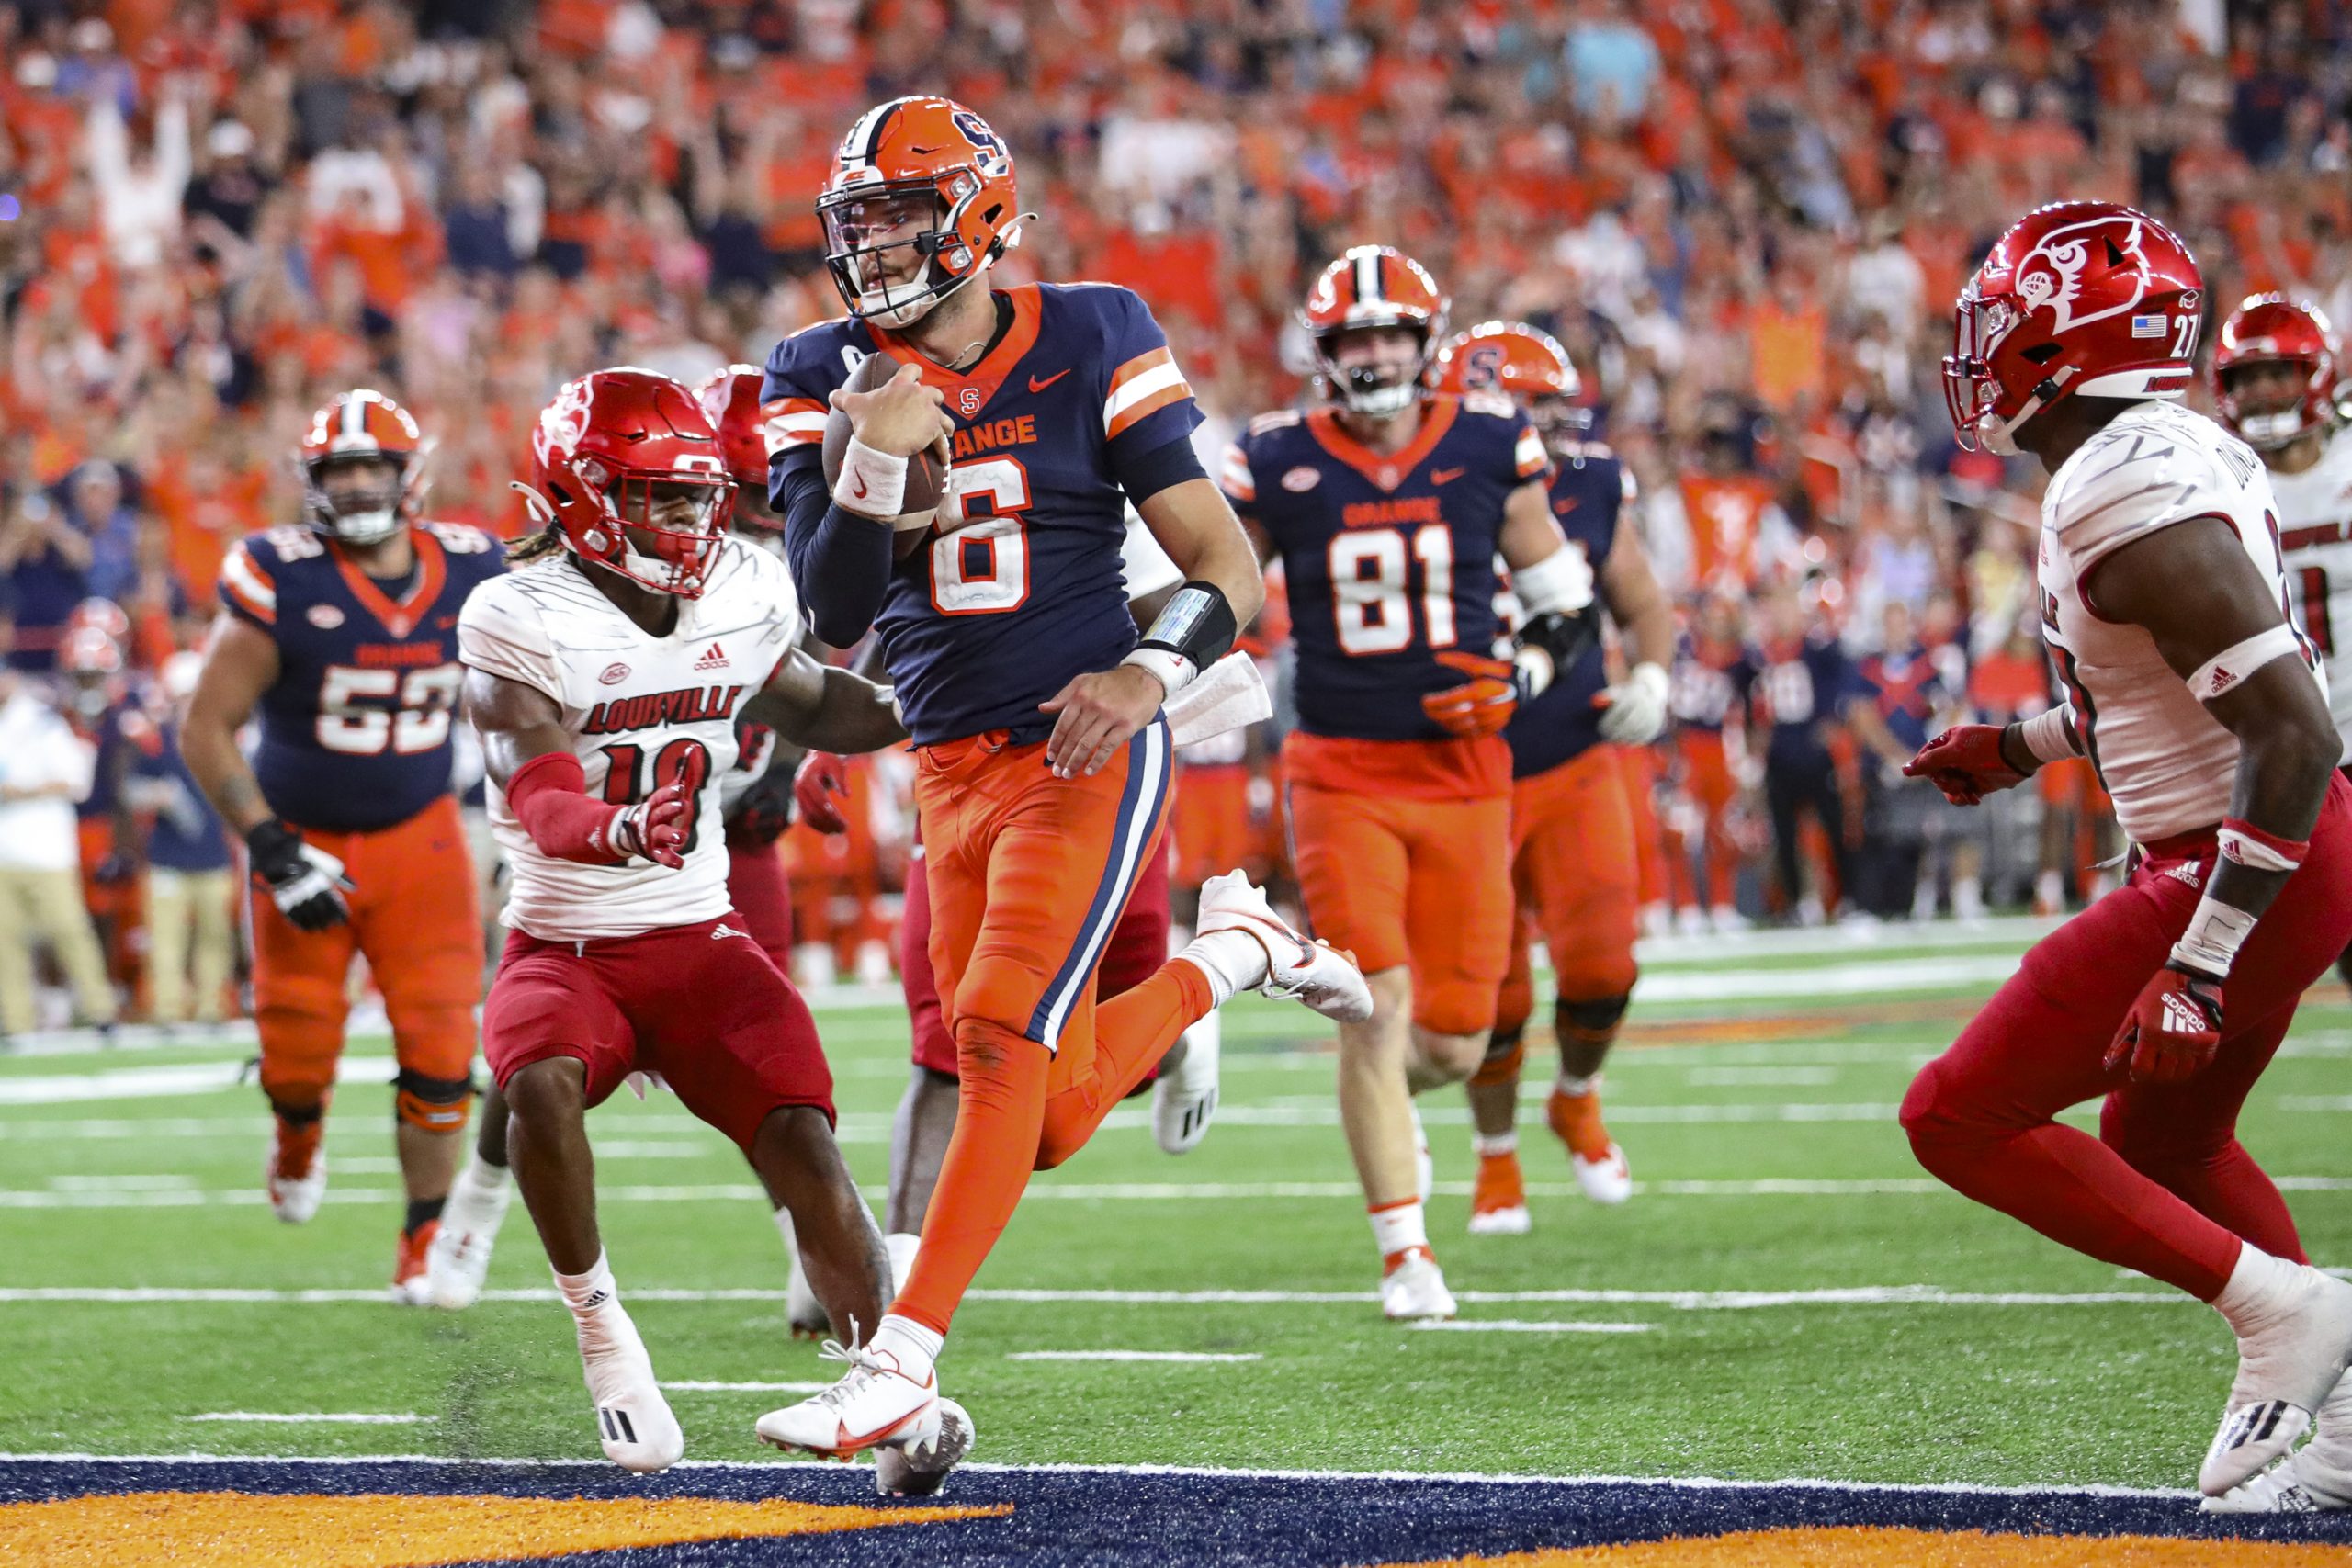 Syracuse quarterback Garrett Shrader coasts into the end zone as he splits Louisville defenders during an ACC football game on Saturday at JMA Wireless Dome.